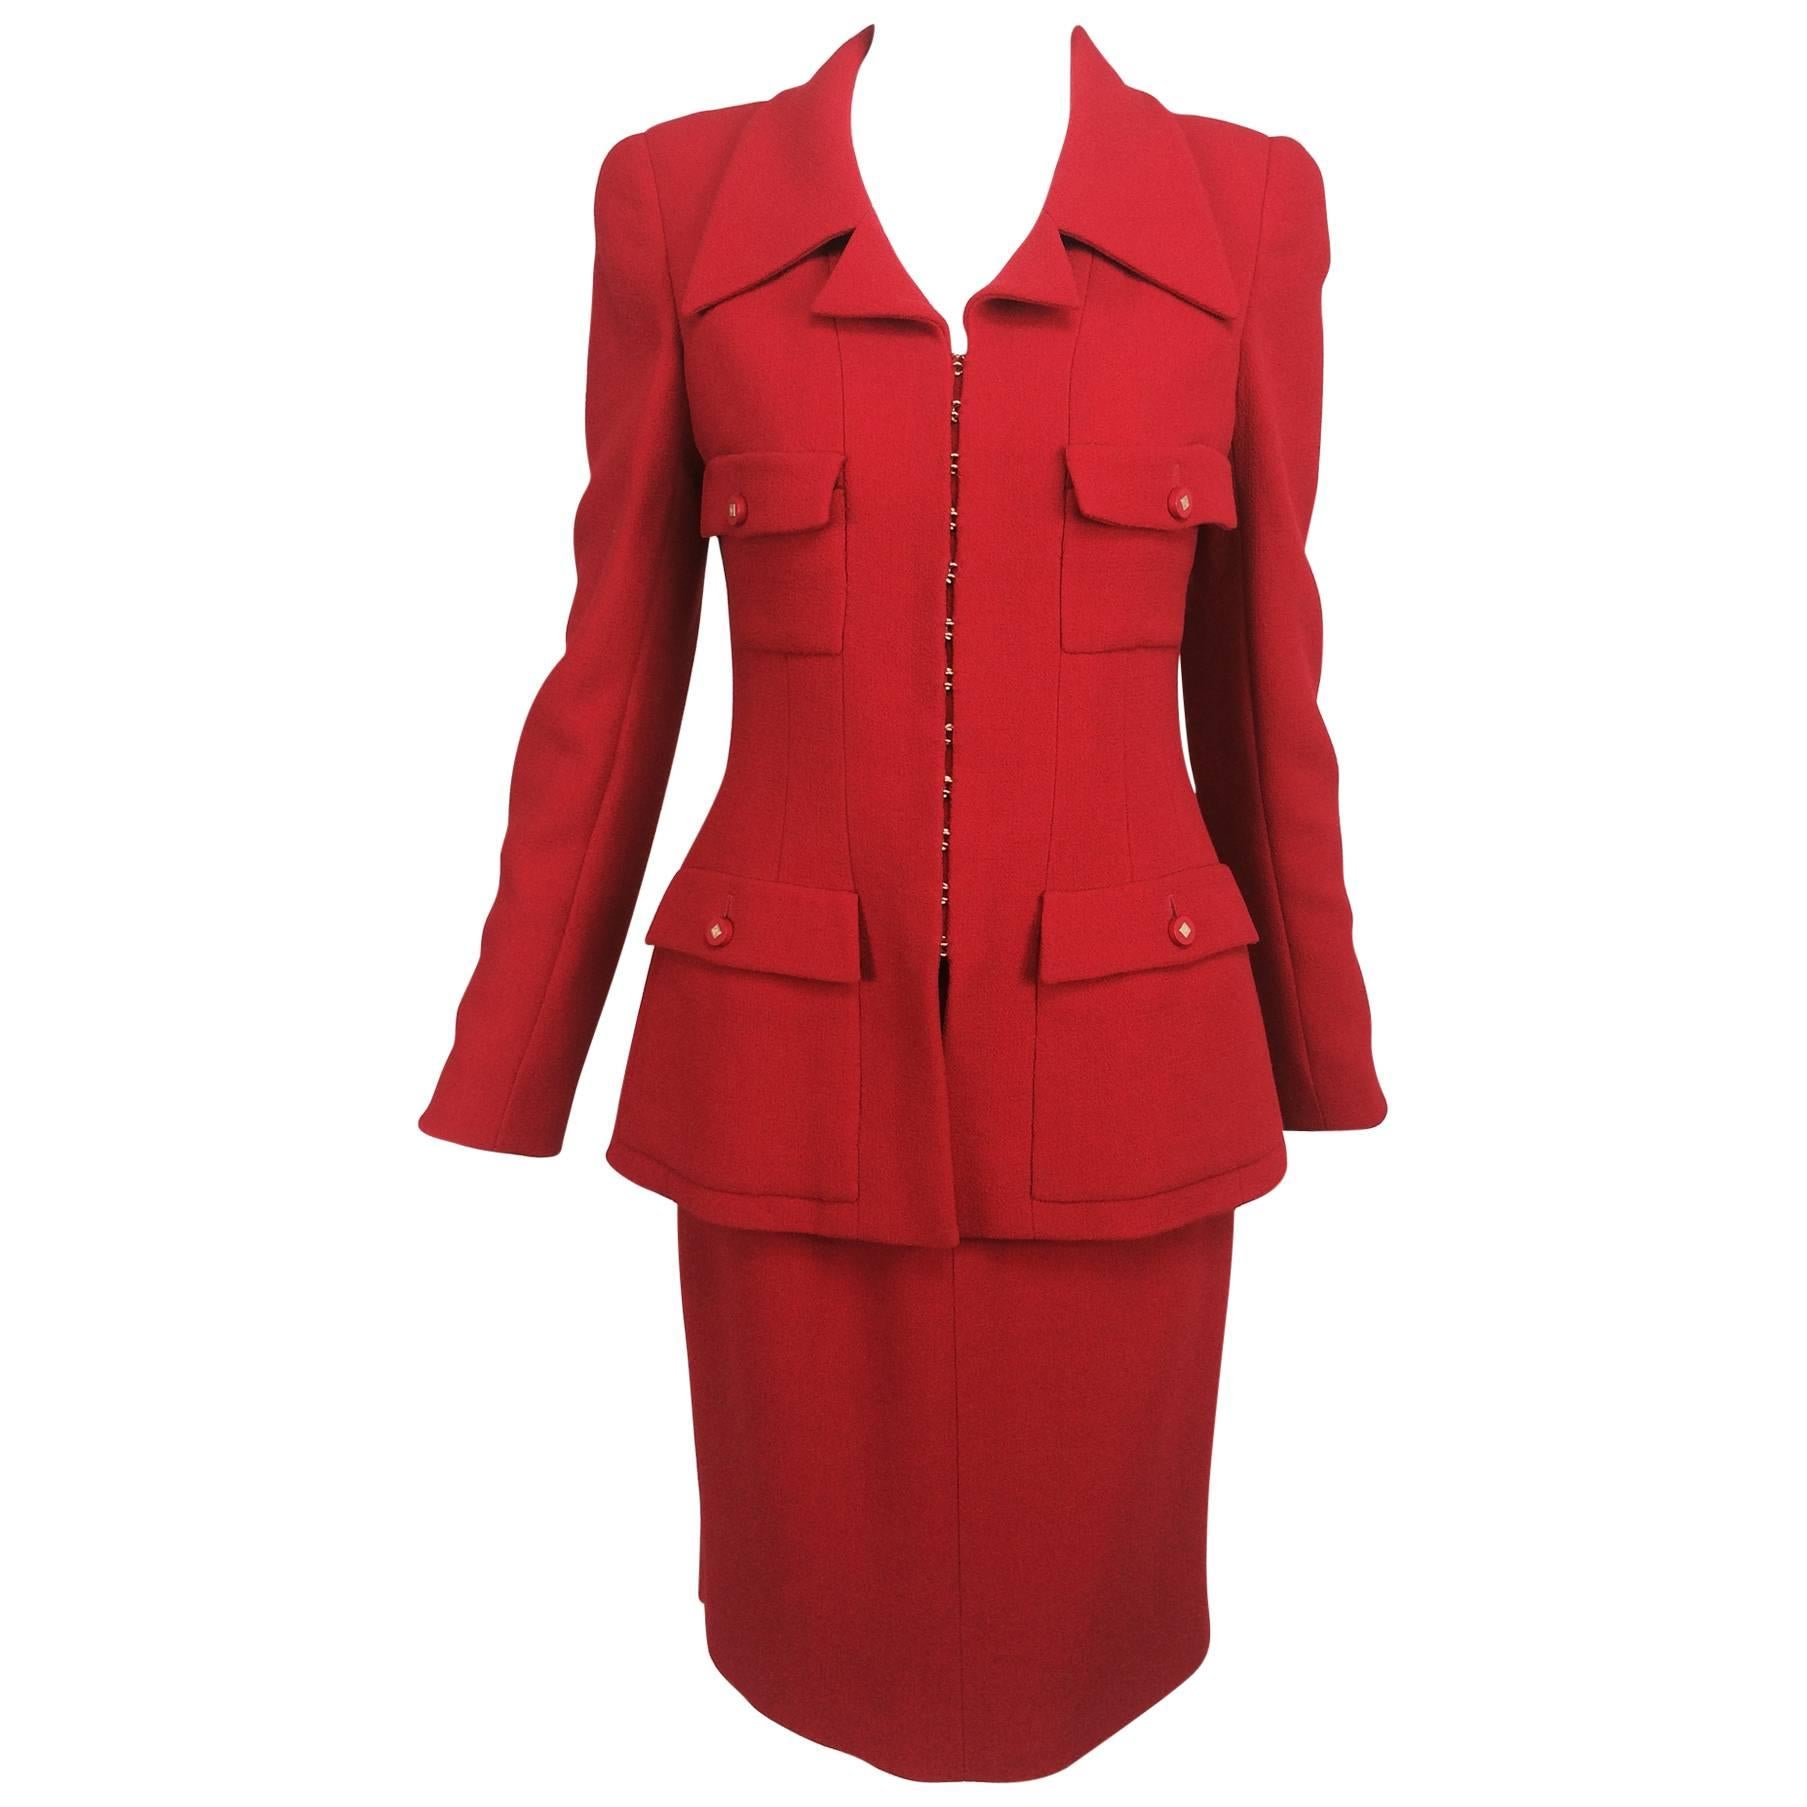 Vintage Chanel fire engine red wool military inspired suit 1996A